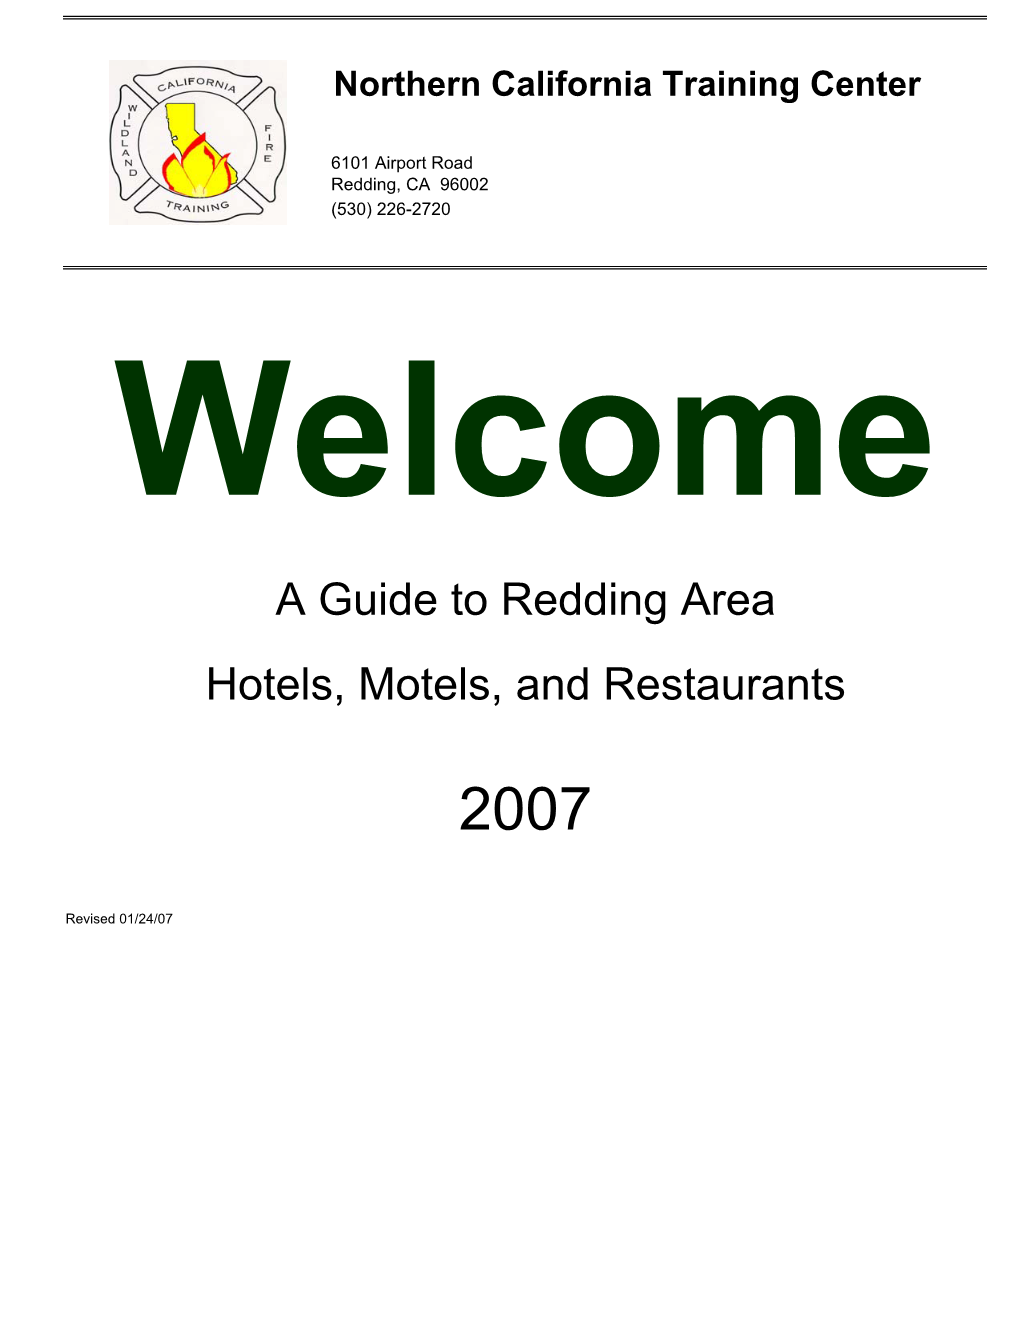 A Guide to Redding Area Hotels, Motels, and Restaurants